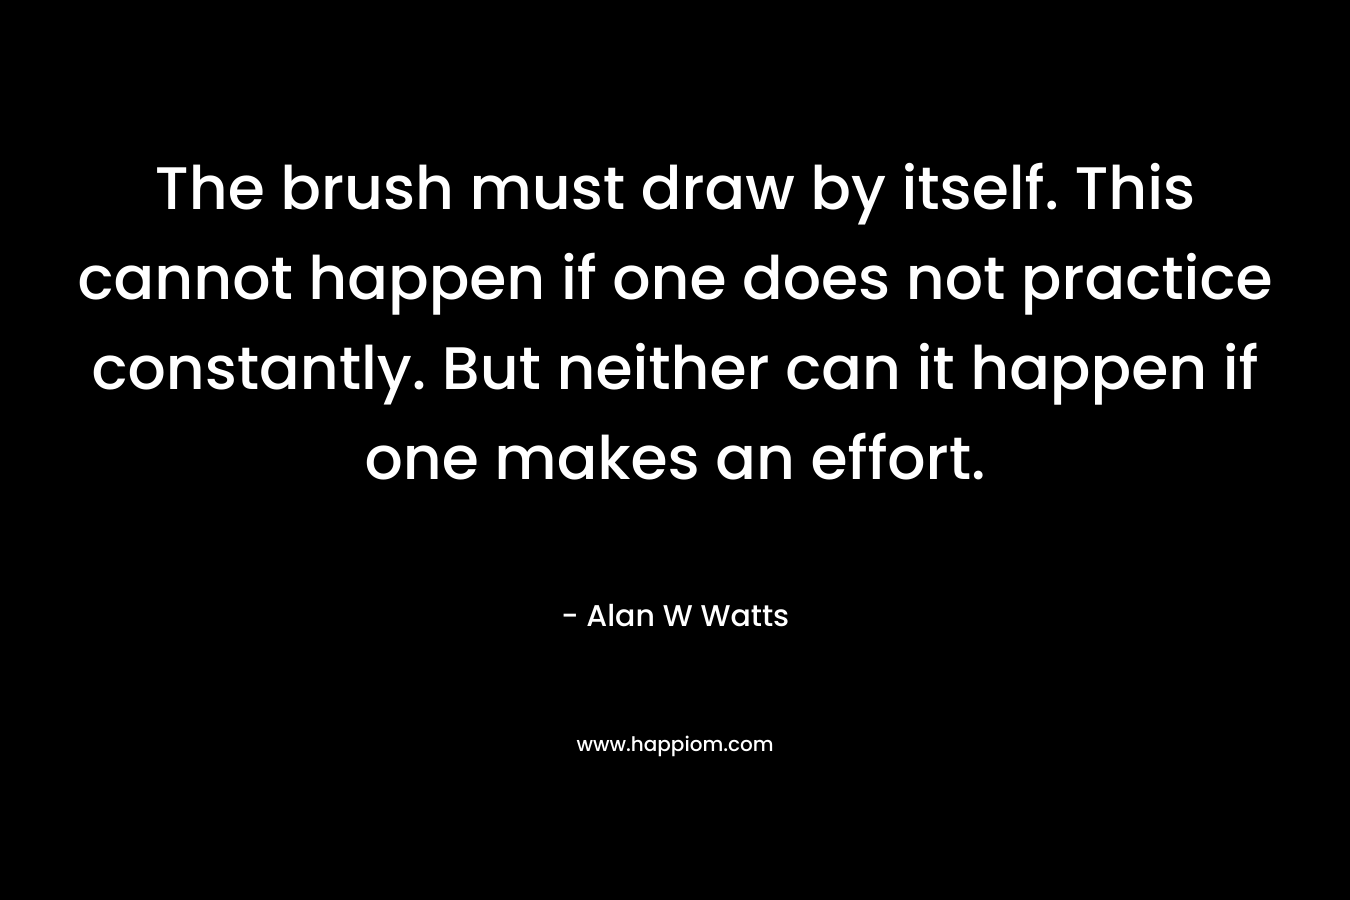 The brush must draw by itself. This cannot happen if one does not practice constantly. But neither can it happen if one makes an effort. – Alan W Watts